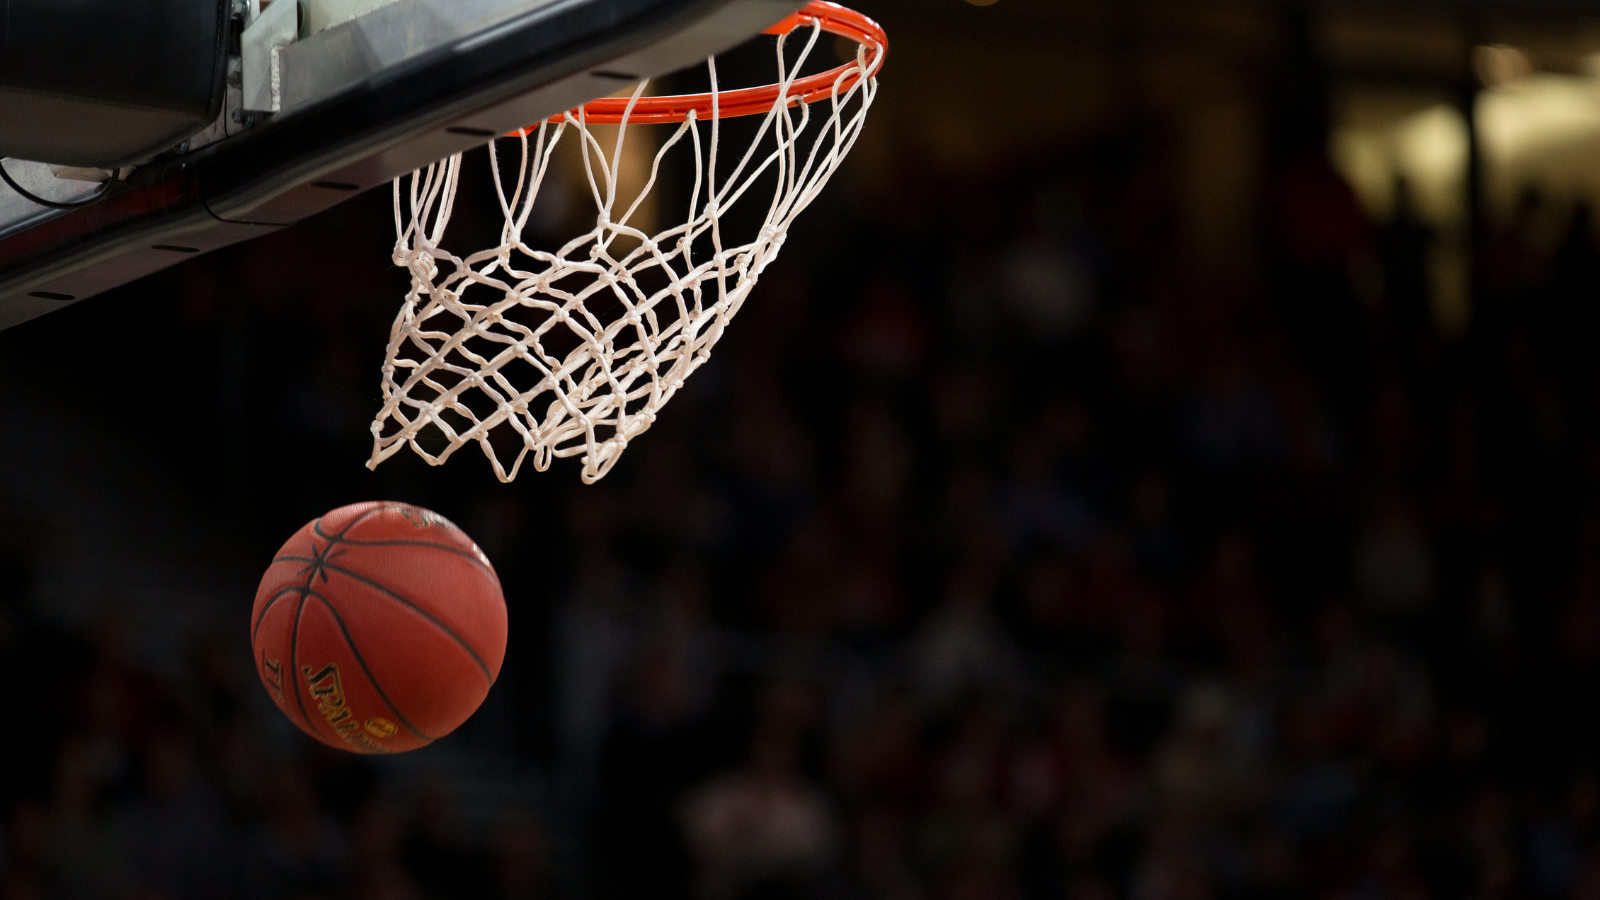 Digital Capabilities to Enable a Successful and Responsible March Madness - Pavilion